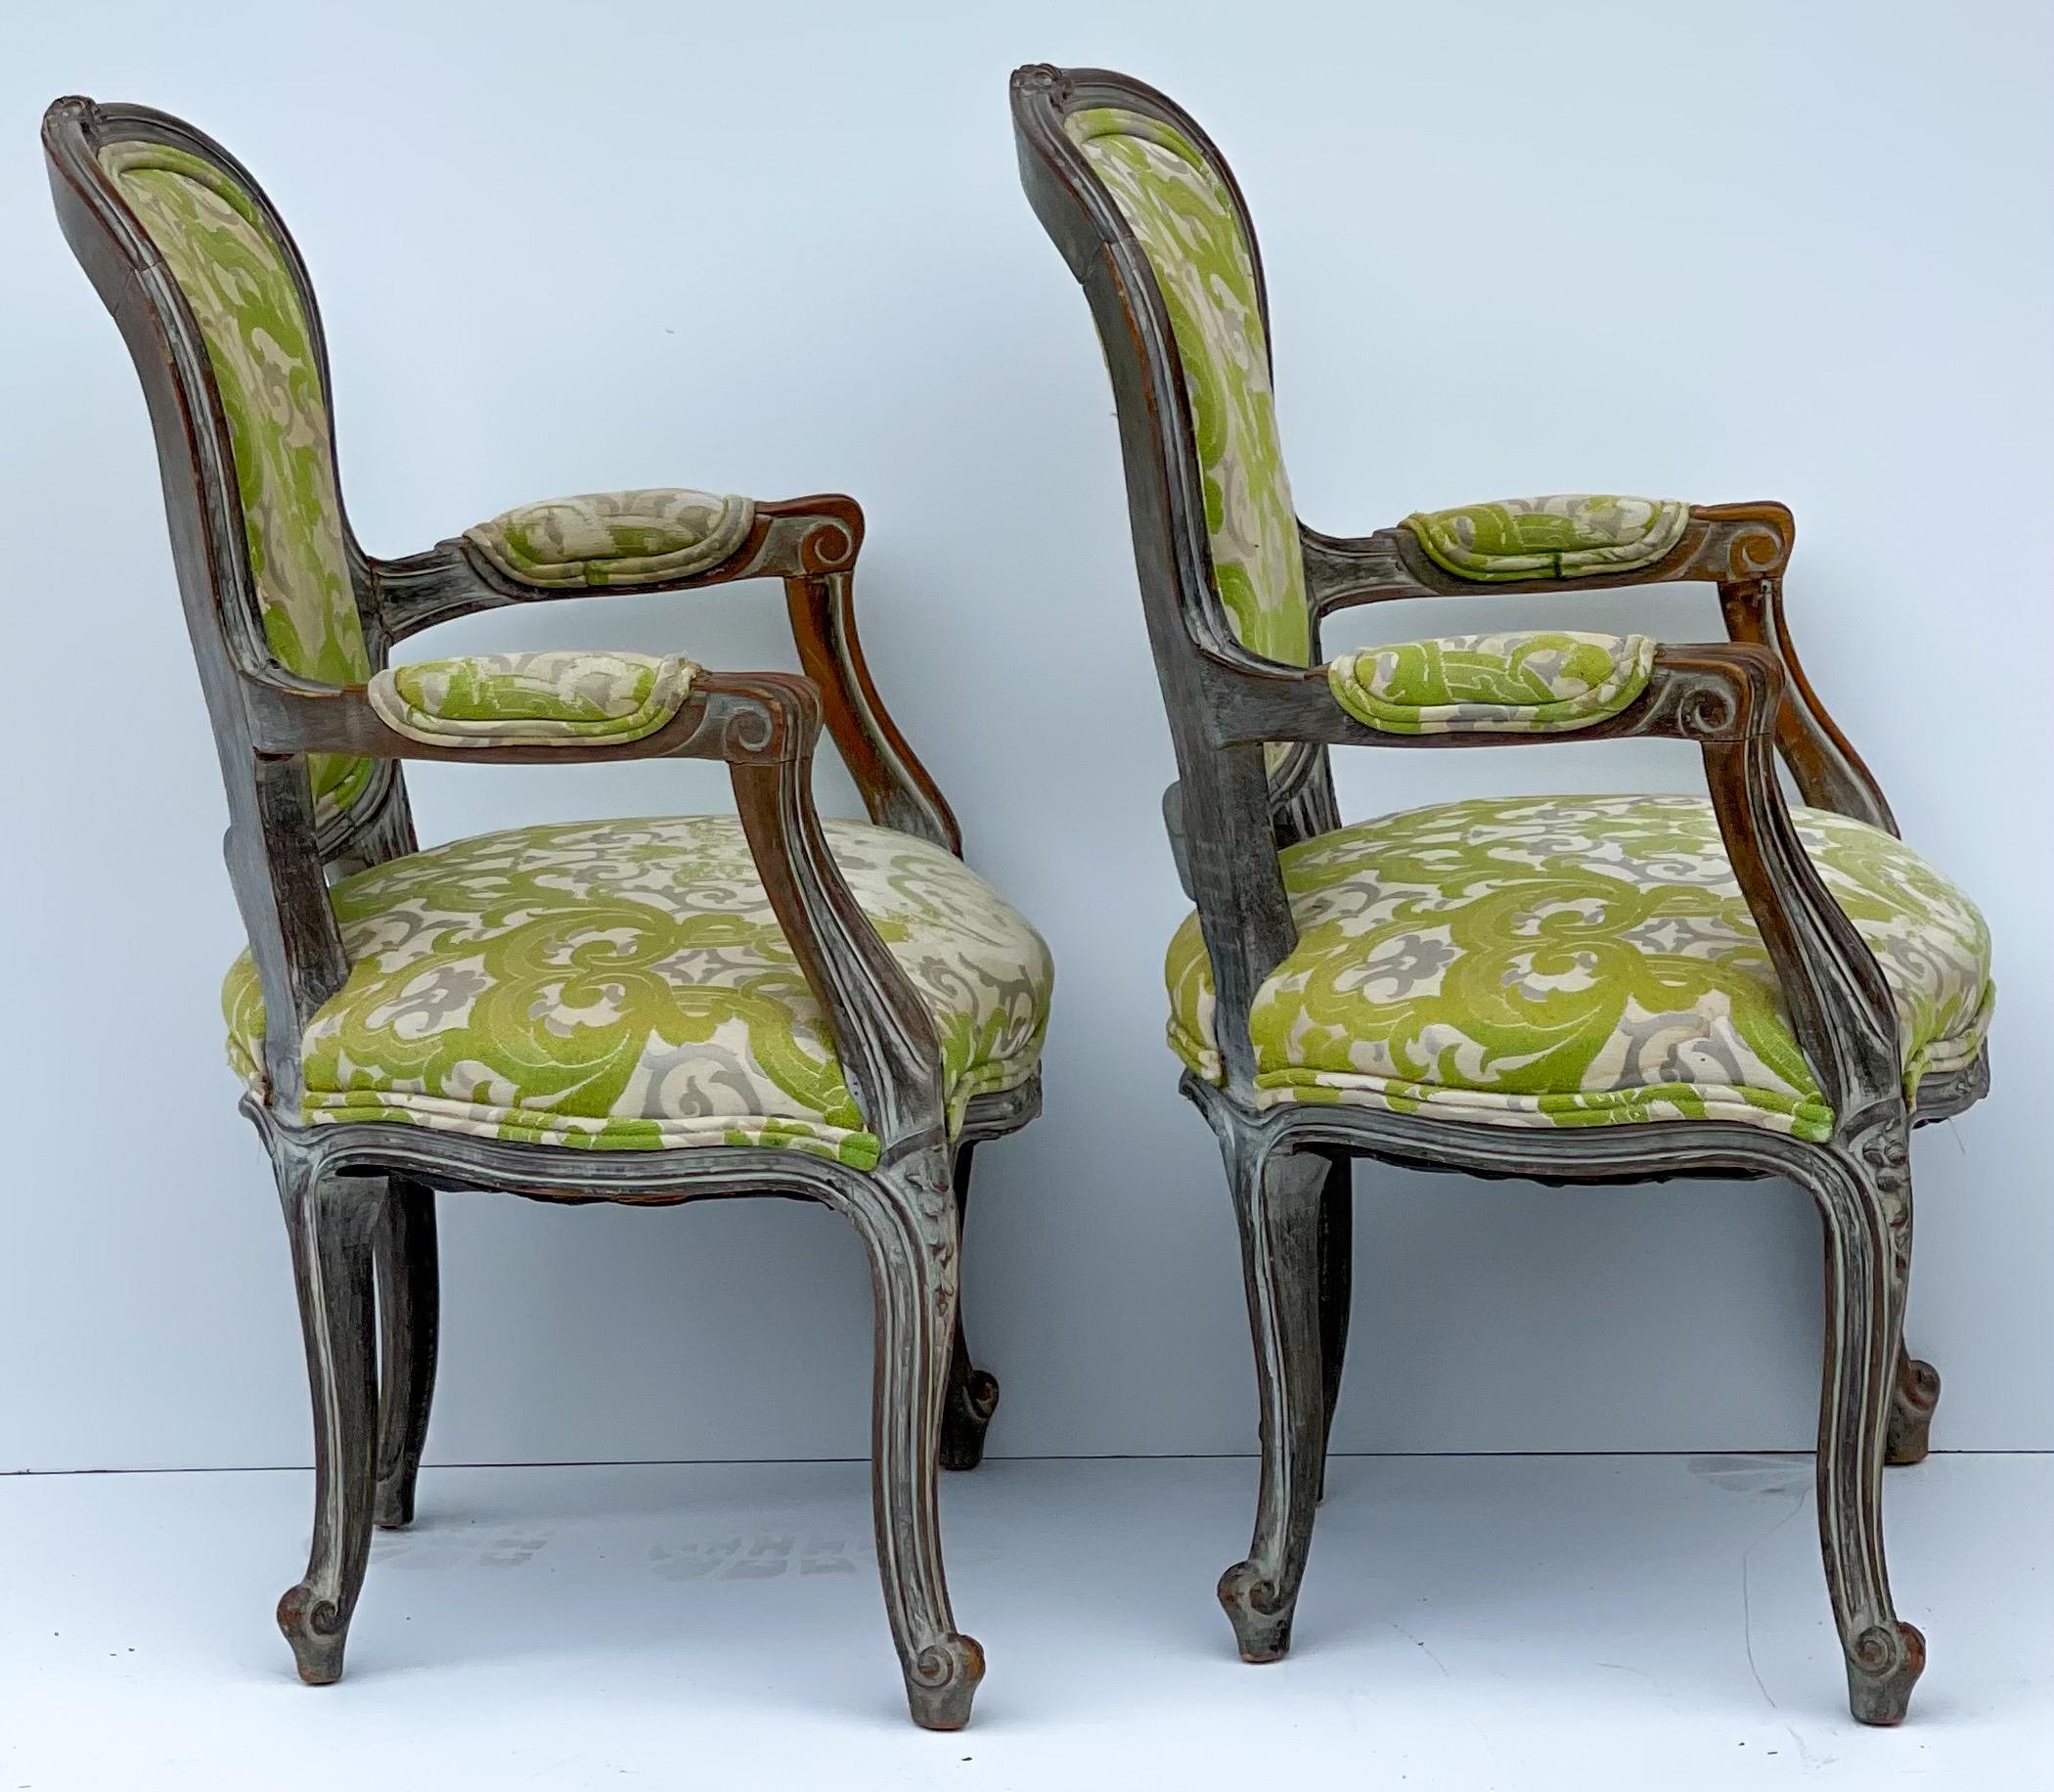 20th Century Early French Louis XVI Style Child’s Chairs in Chartreuse Damask, Pair For Sale